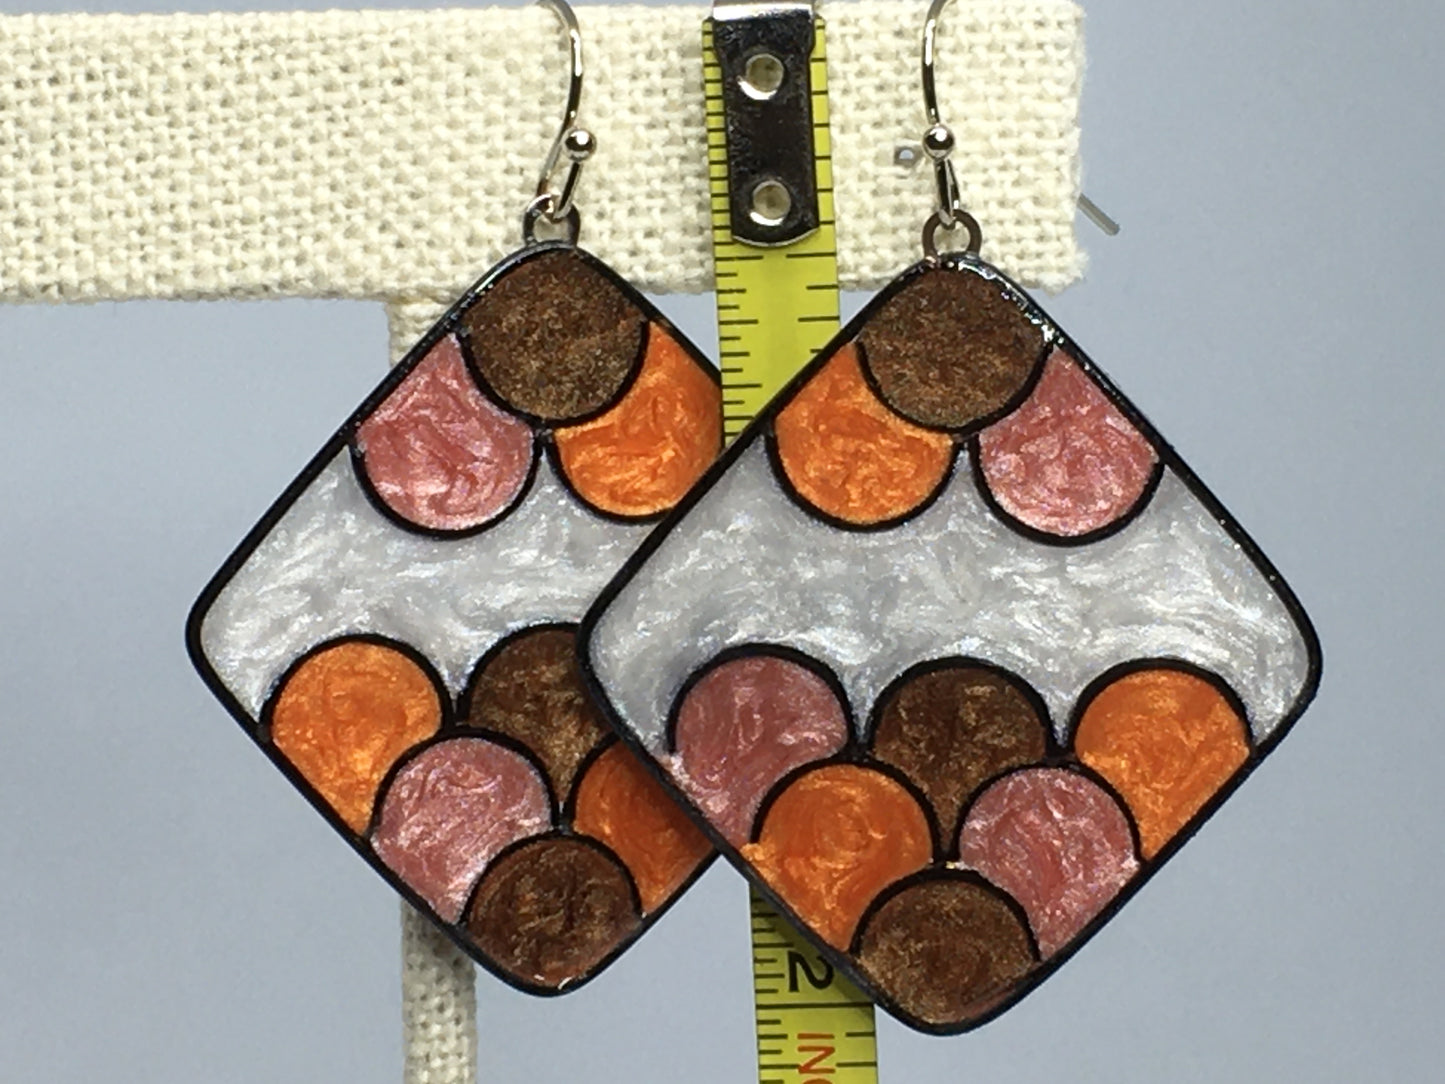 Brown, orange, apricot and white earrings